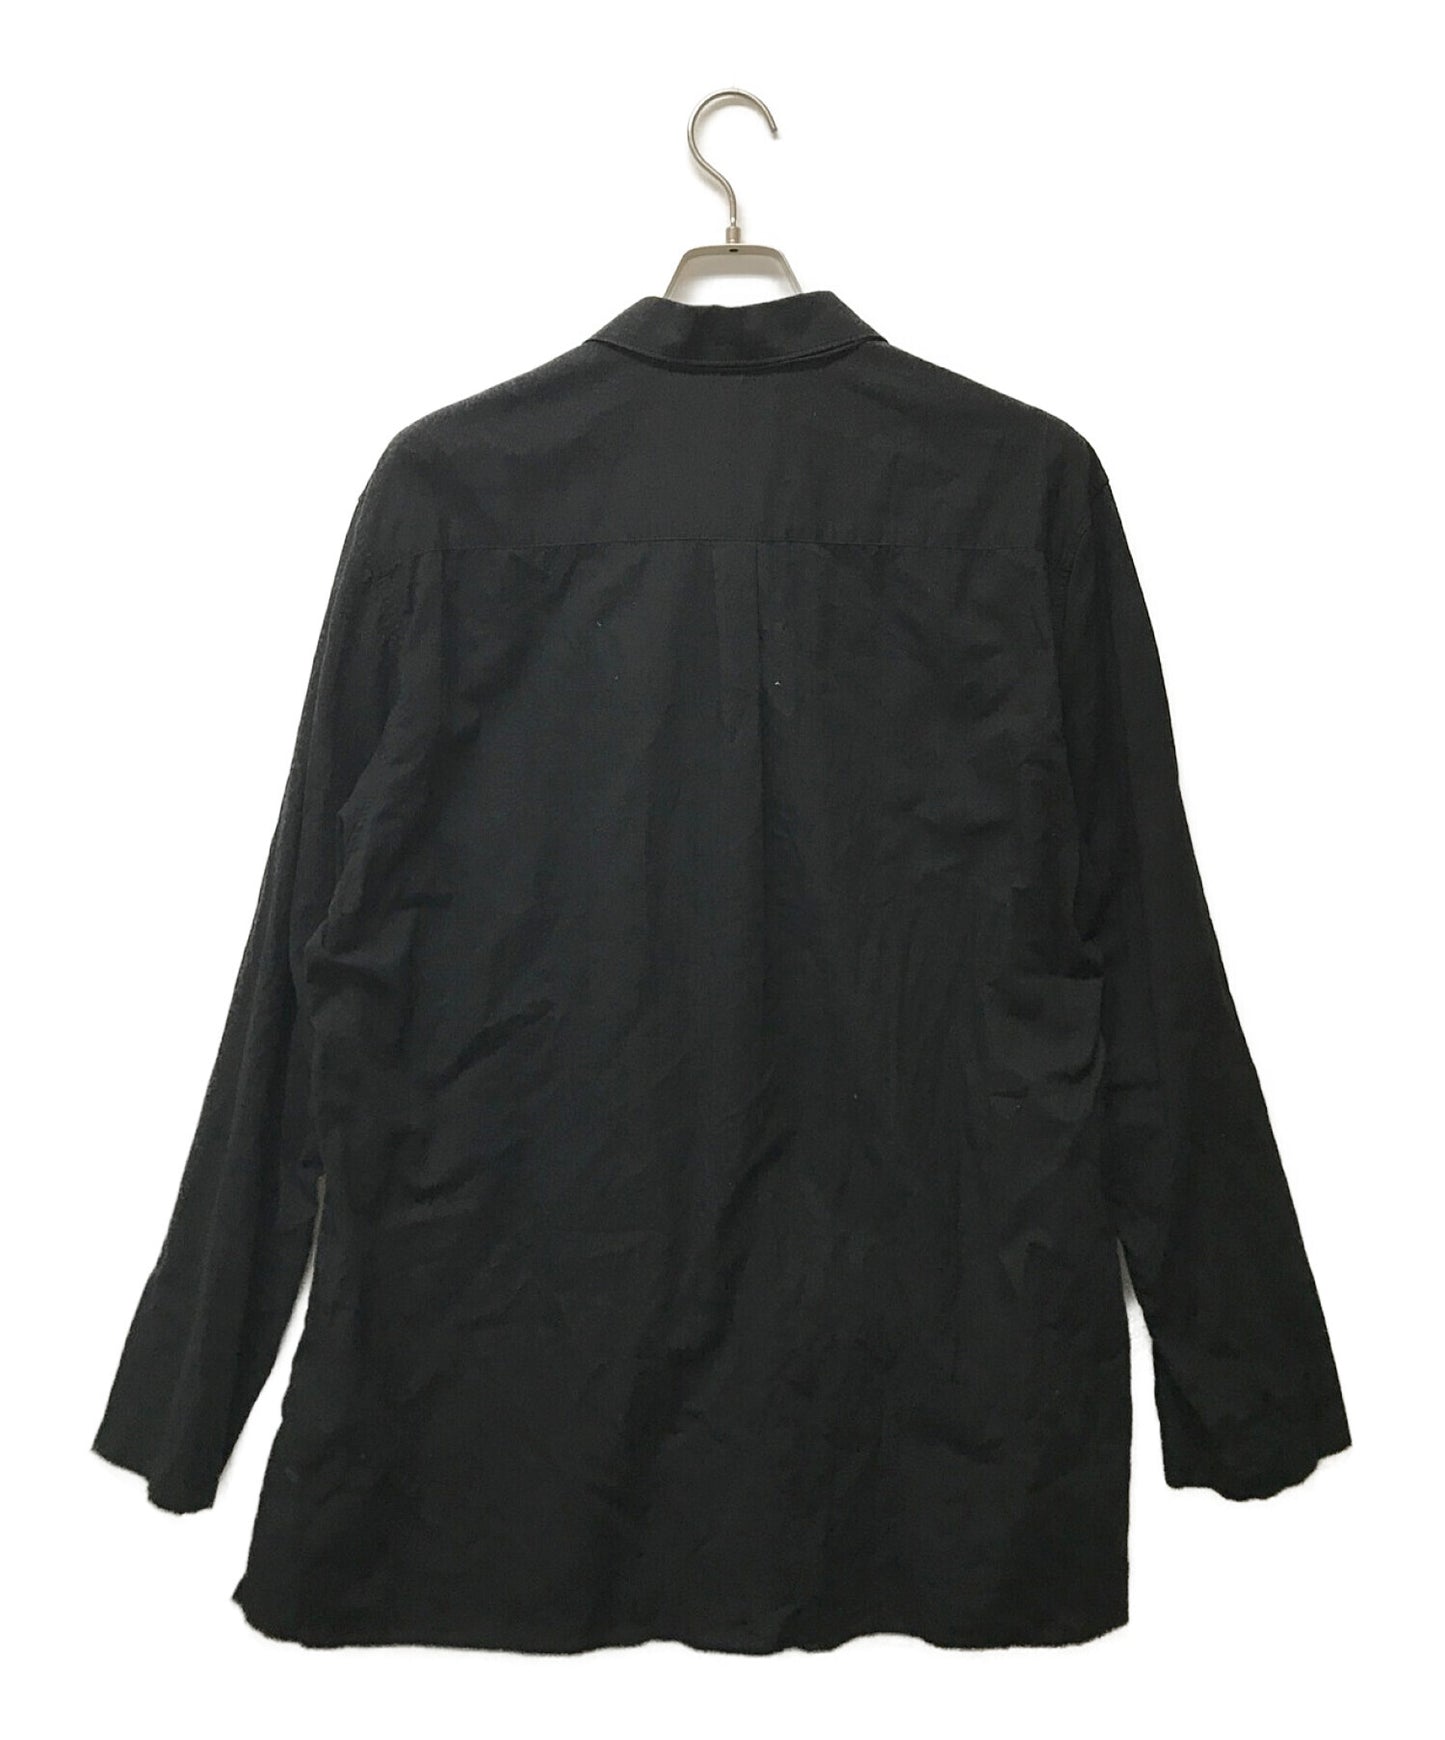 [Pre-owned] Yohji Yamamoto pour homme double-left shirt HD-B16-012